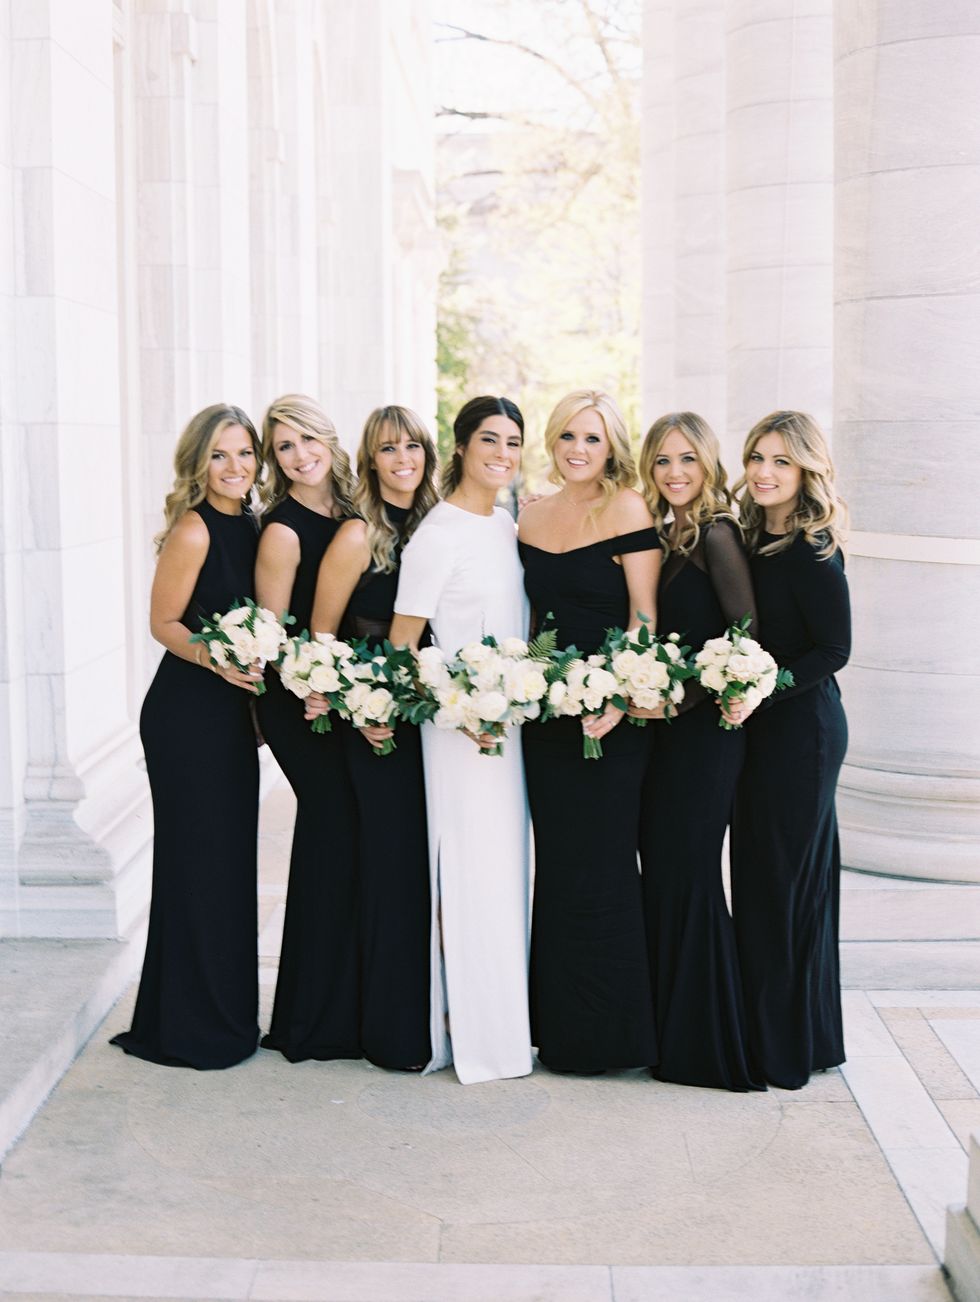 <p>Arielle's six best friends from college served as her bridesmaids, and wore different black dresses from <a href="https://www.aliceandolivia.com/" target="_blank" tabindex="-1">Alice & Olivia</a>, <a href="http://www.normakamali.com/" target="_blank" tabindex="-1">Norma Kamali</a>, <a href="http://www.nicolemiller.com/" target="_blank" tabindex="-1">Nicole Miller</a>, and <a href="http://www.halston.com/" target="_blank" tabindex="-1">Halston Heritage</a>.</p>